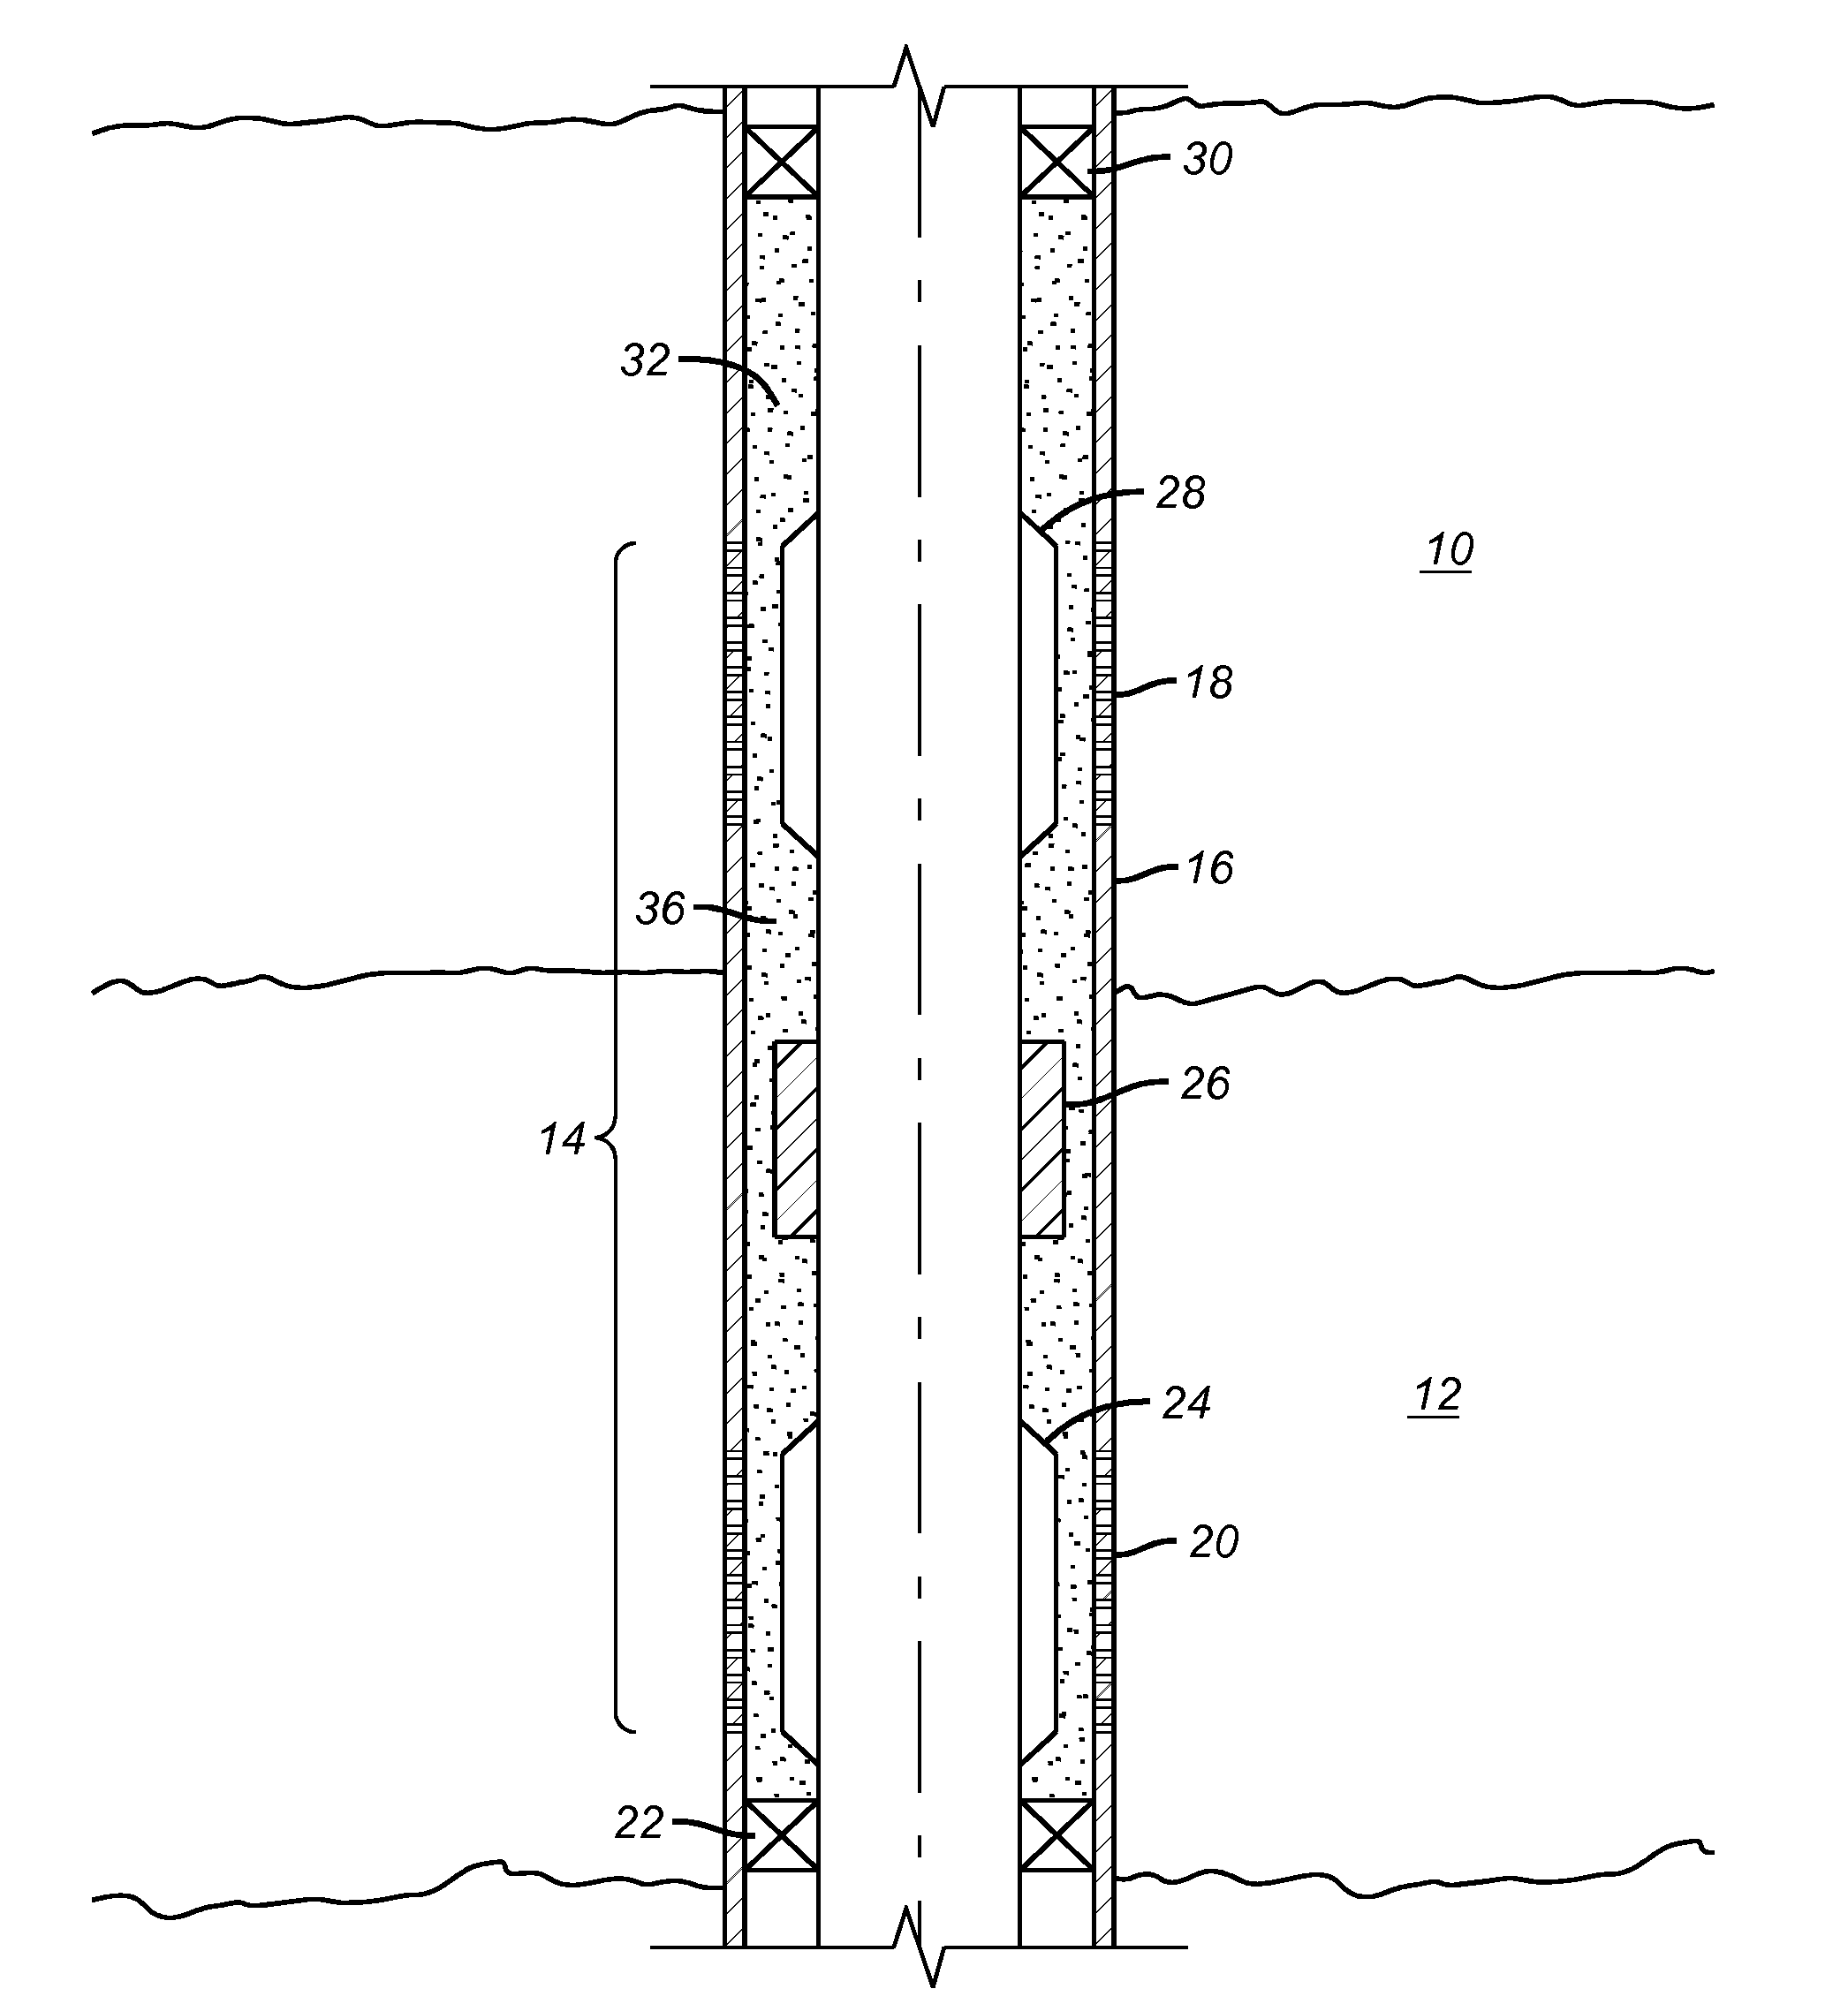 Method of isolating and completing multi-zone frac packs